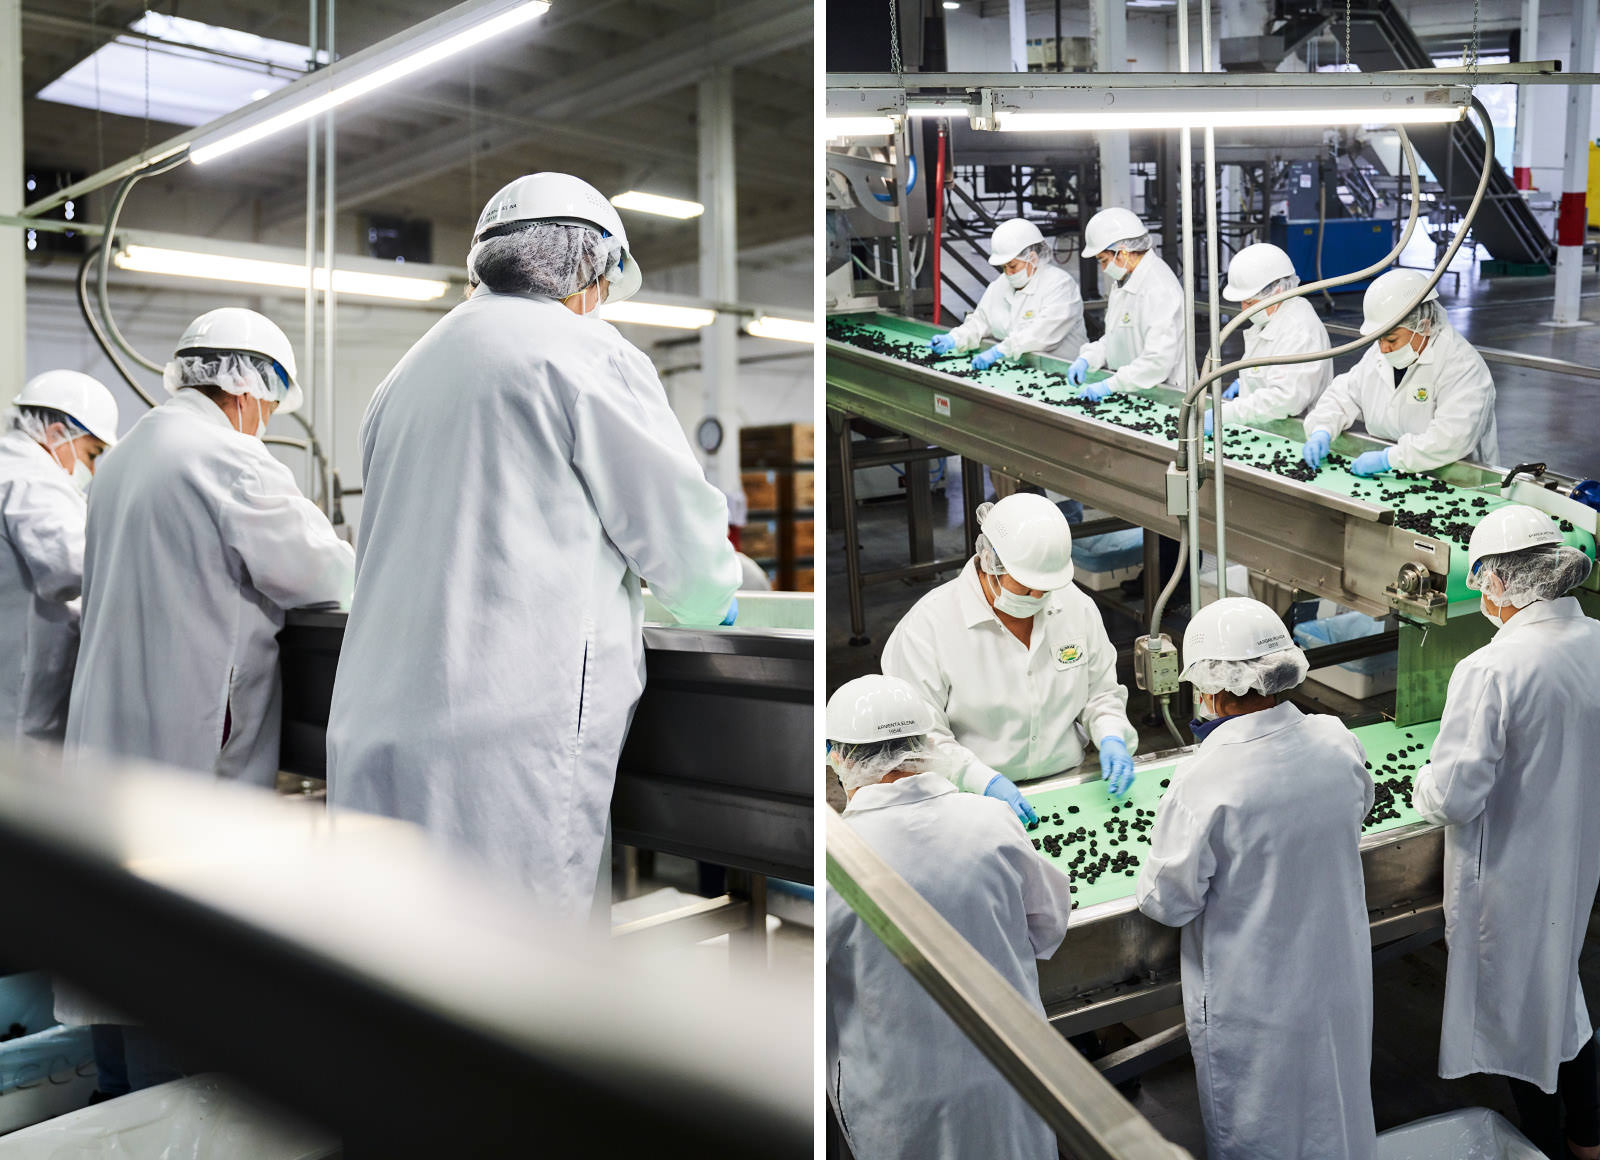 Pictures of employees working at a production line